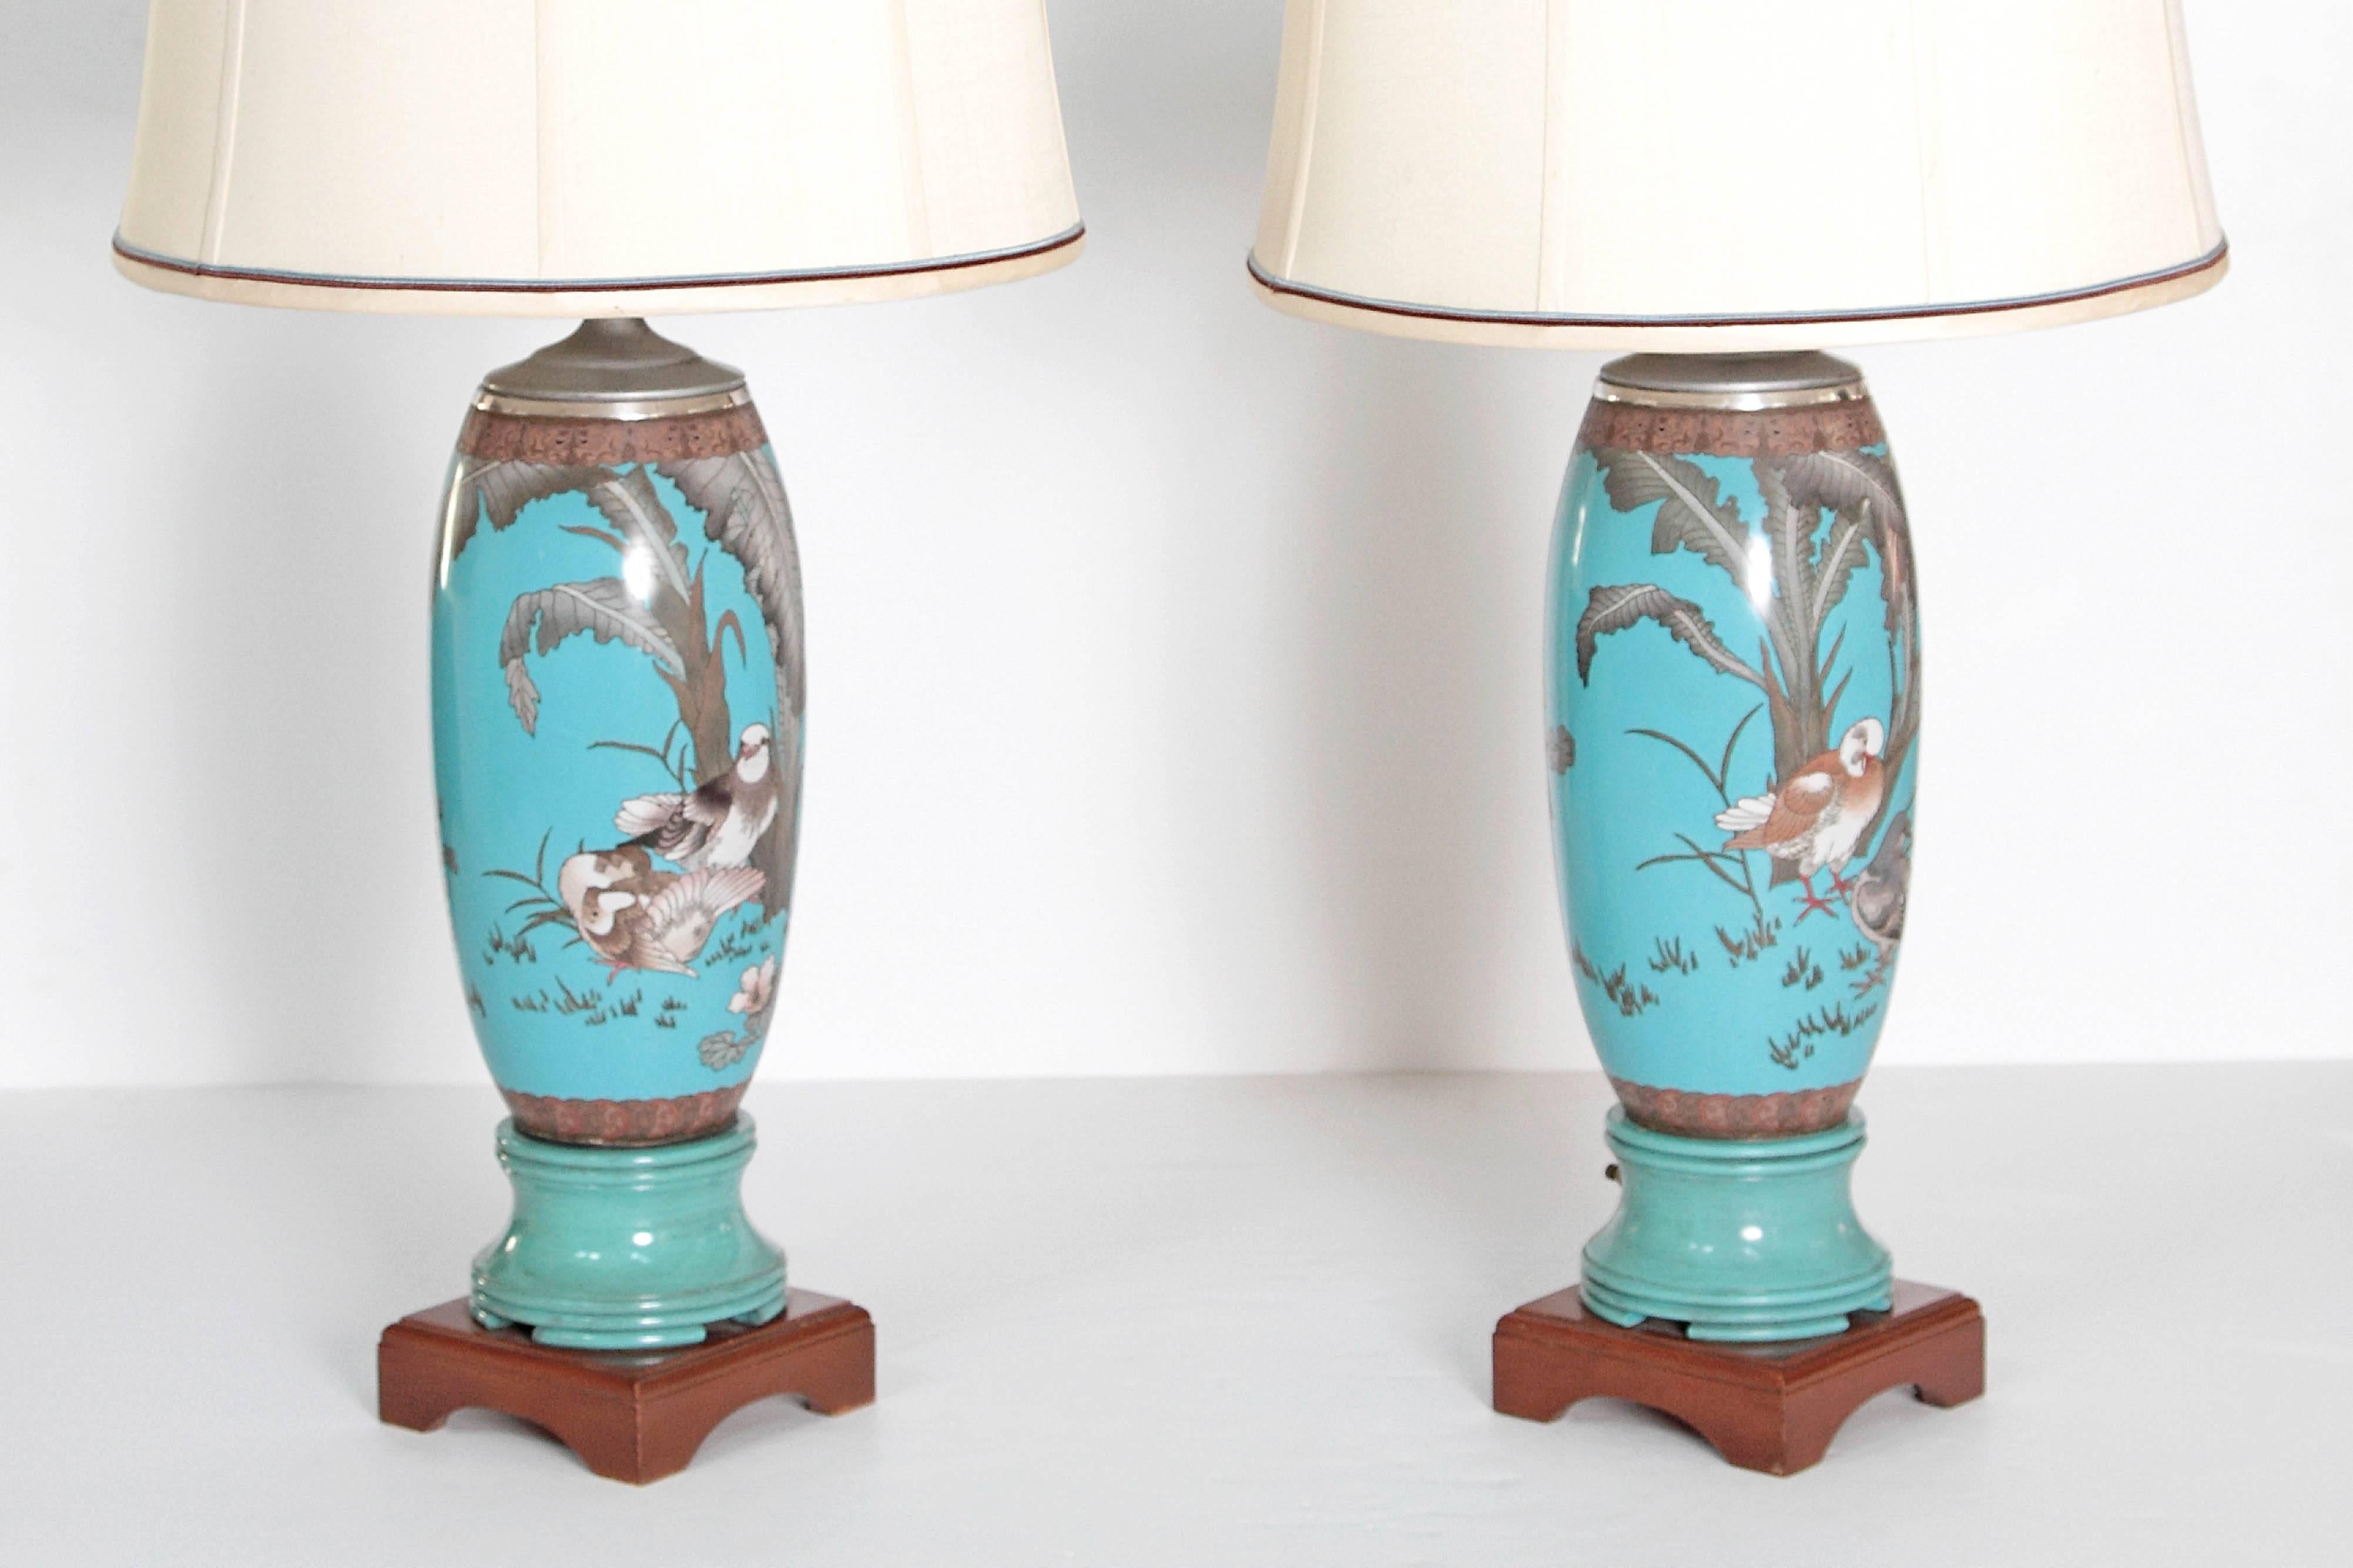 A pair of 19th century French cloisonne vases mounted as lamps. The body of the lamps are turquoise  with images of birds and foliage. Decorative 6 inch square bases.